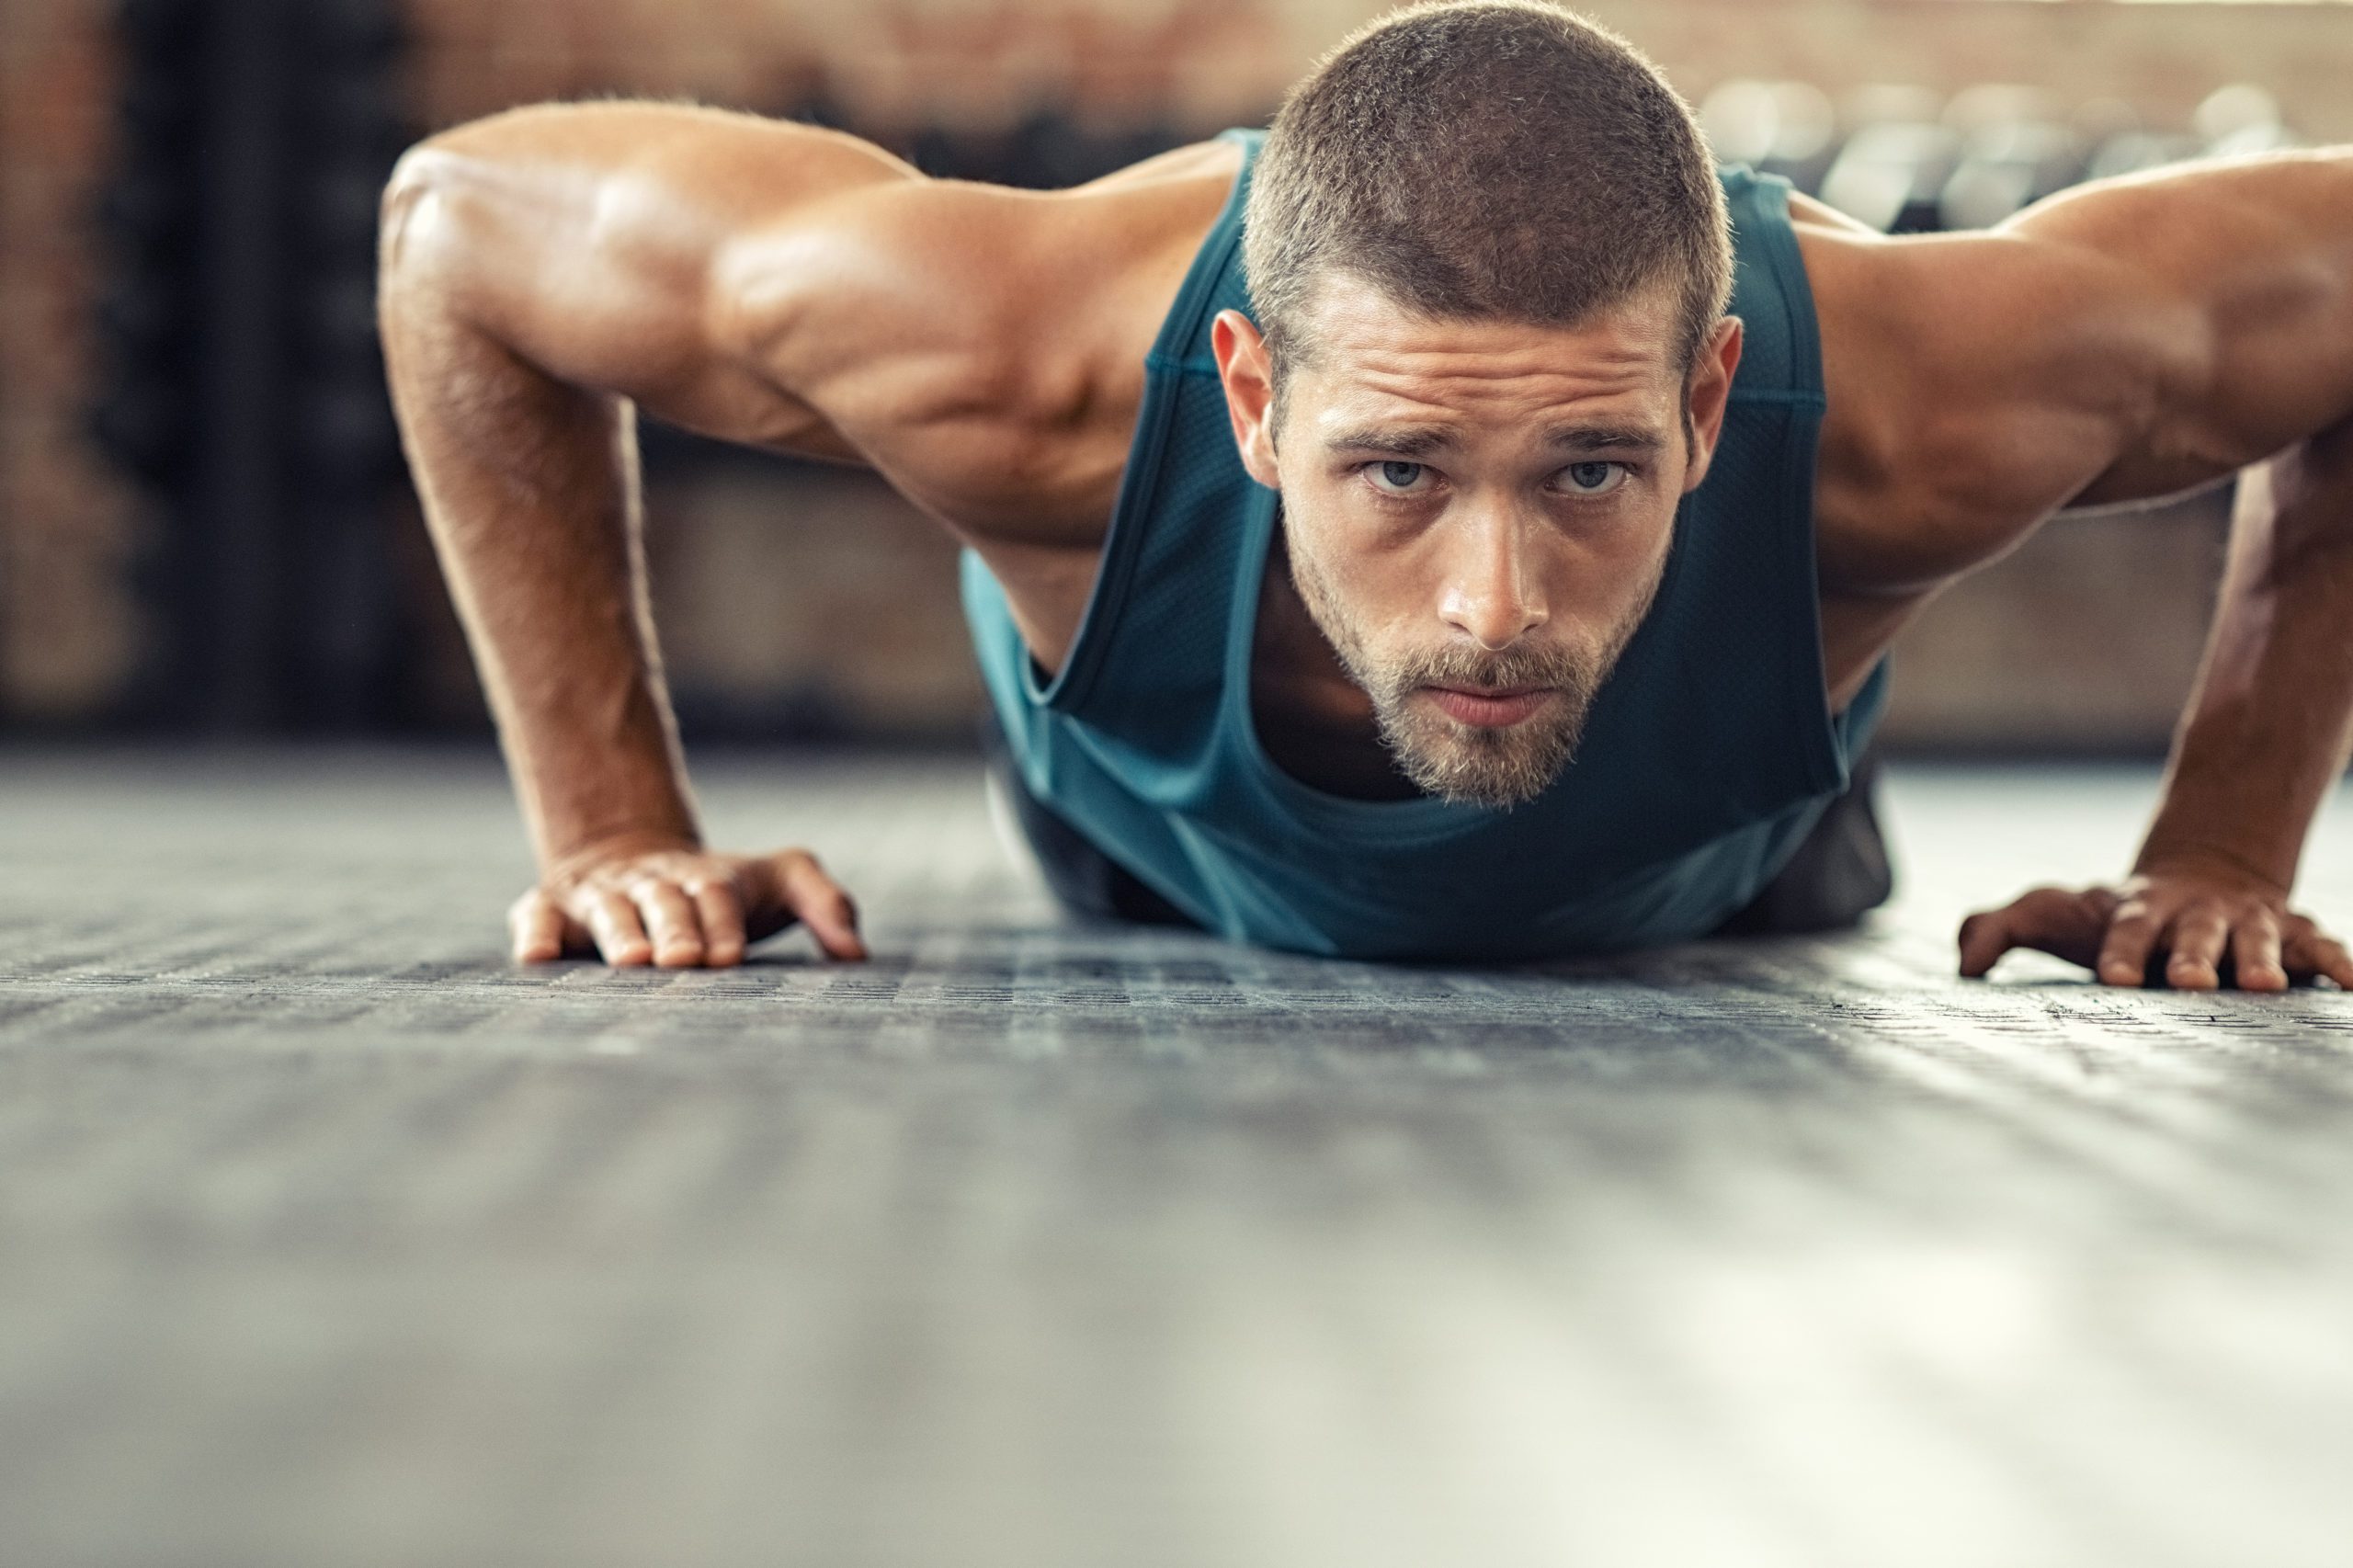 how to push up exercise at the home